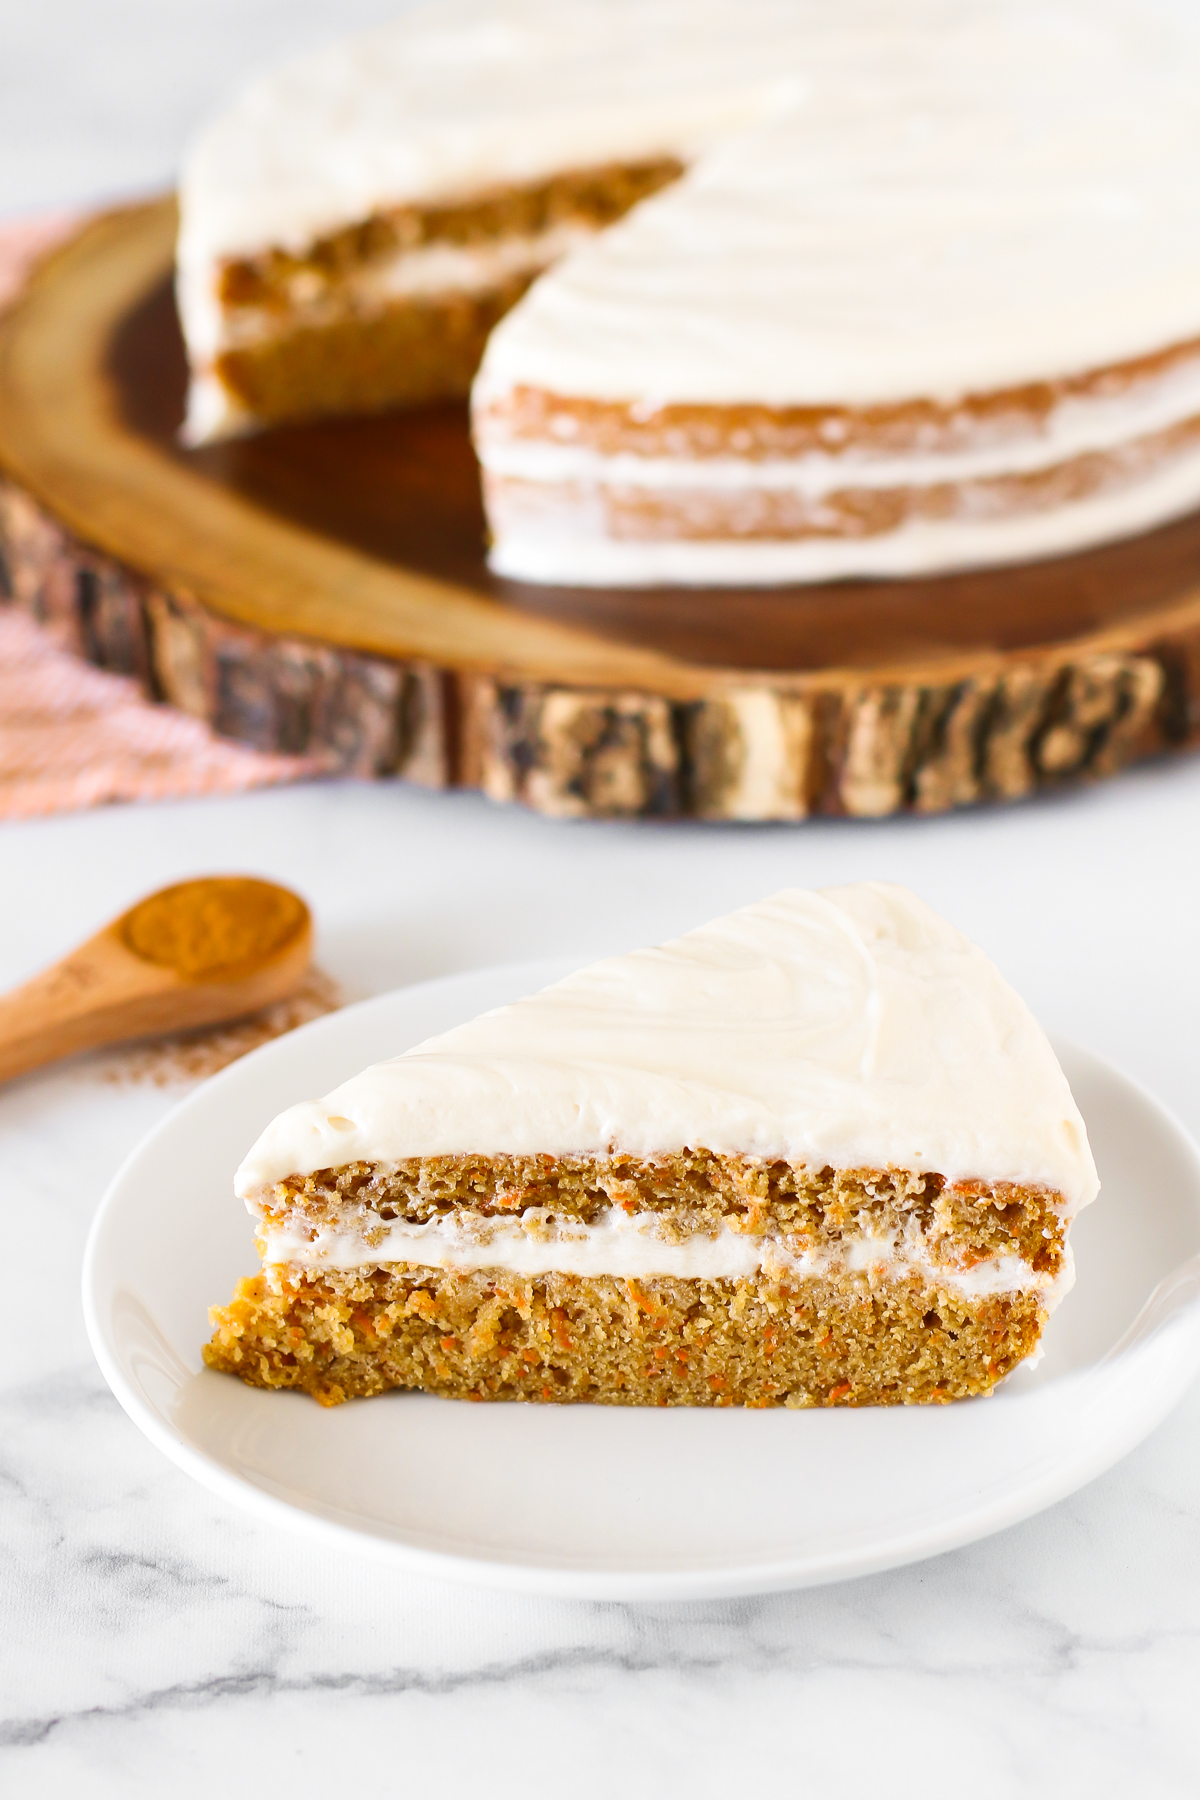 Easy, Healthy Gluten Free Carrot Cake | From Scratch Fast